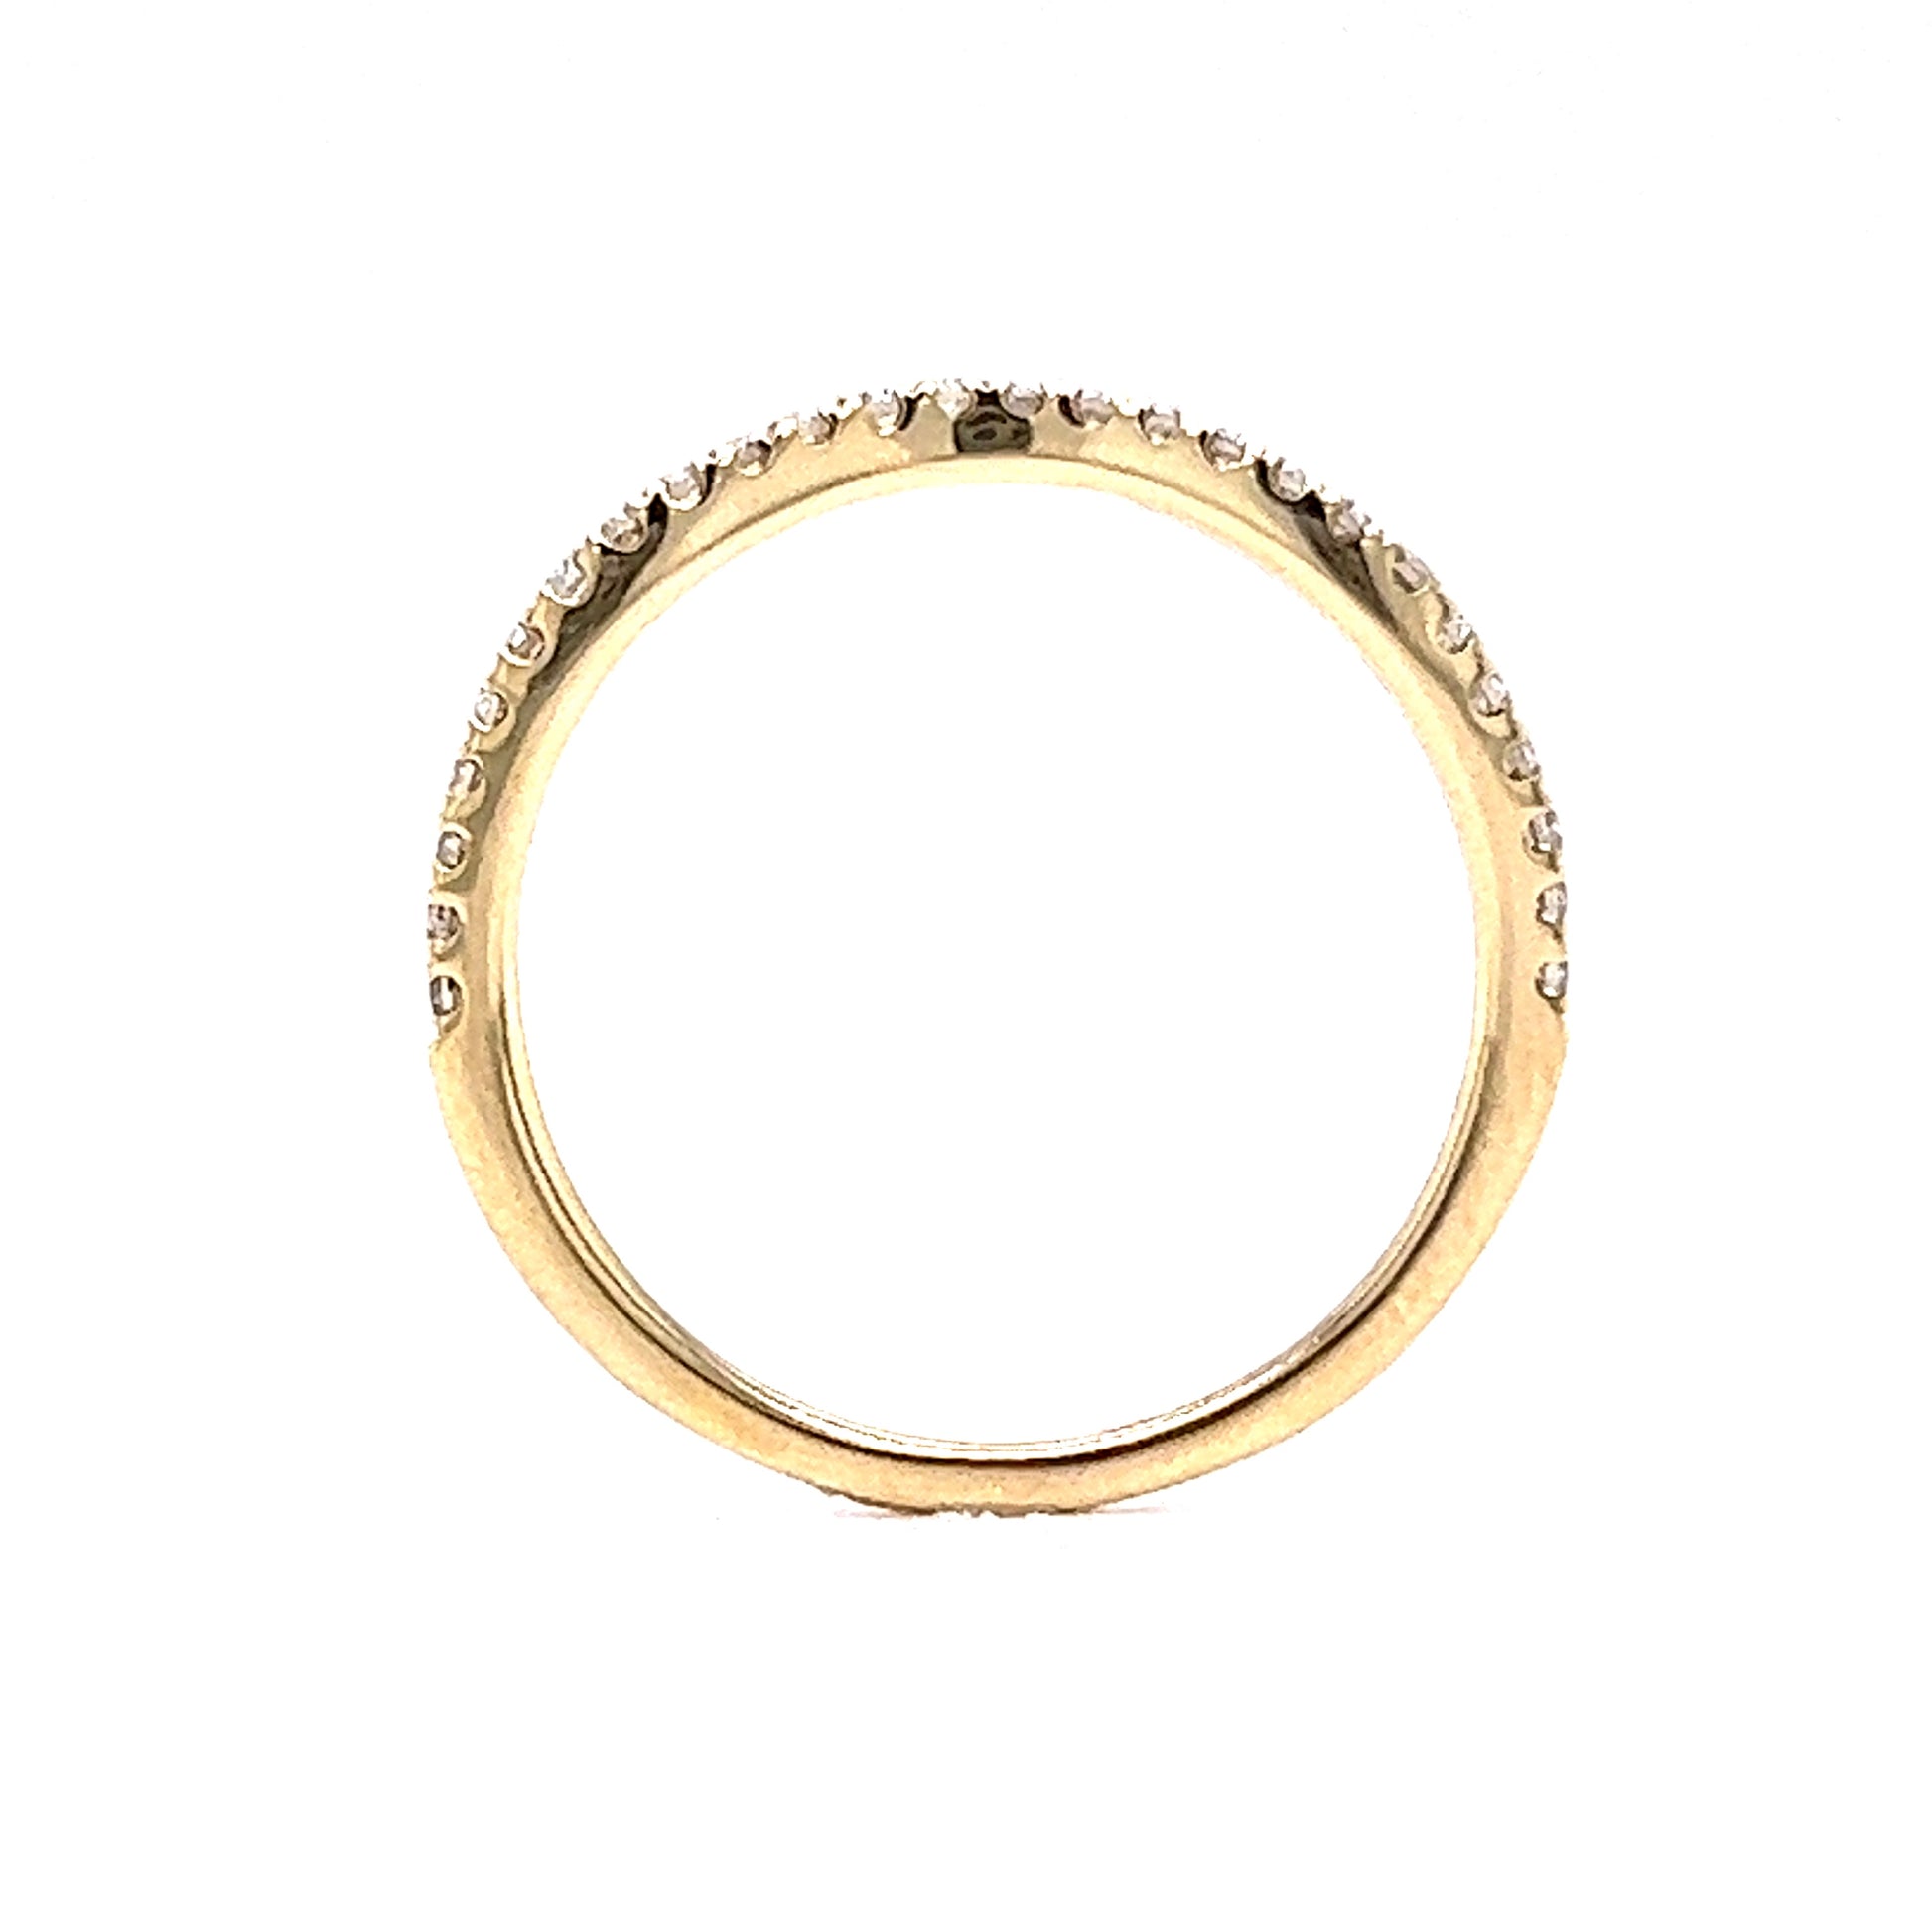 Thin Curved Diamond Wedding Band in 14k Yellow GoldComposition: 14 Karat Yellow Gold Ring Size: 6.5 Total Diamond Weight: .18ct Total Gram Weight: 1.1 g Inscription: 14k 585
      